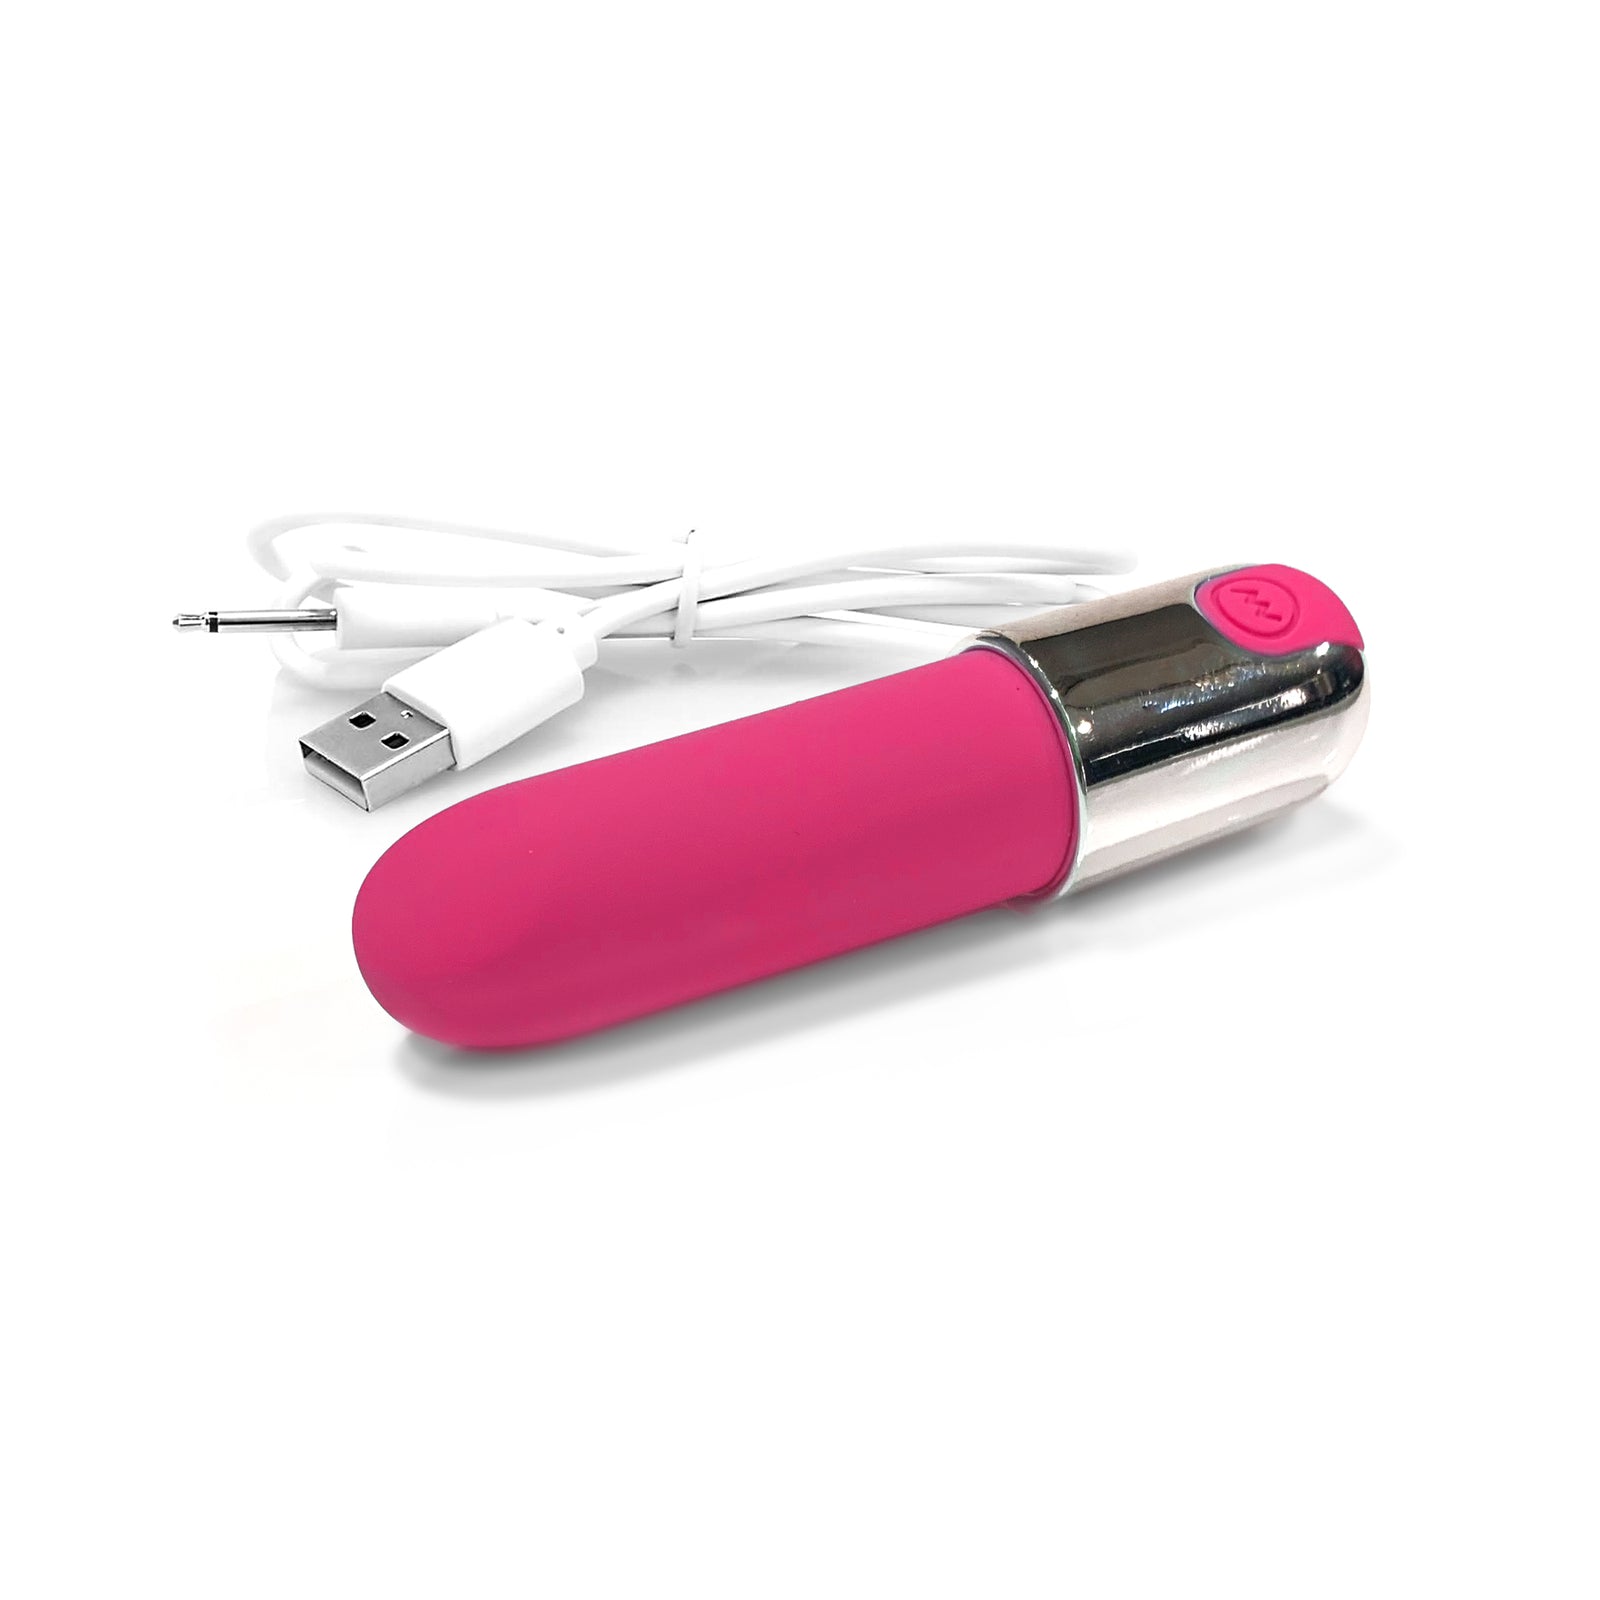 NIXIE Smooch Rechargeable Lipstick Vibrator, Pink Ombre - THES